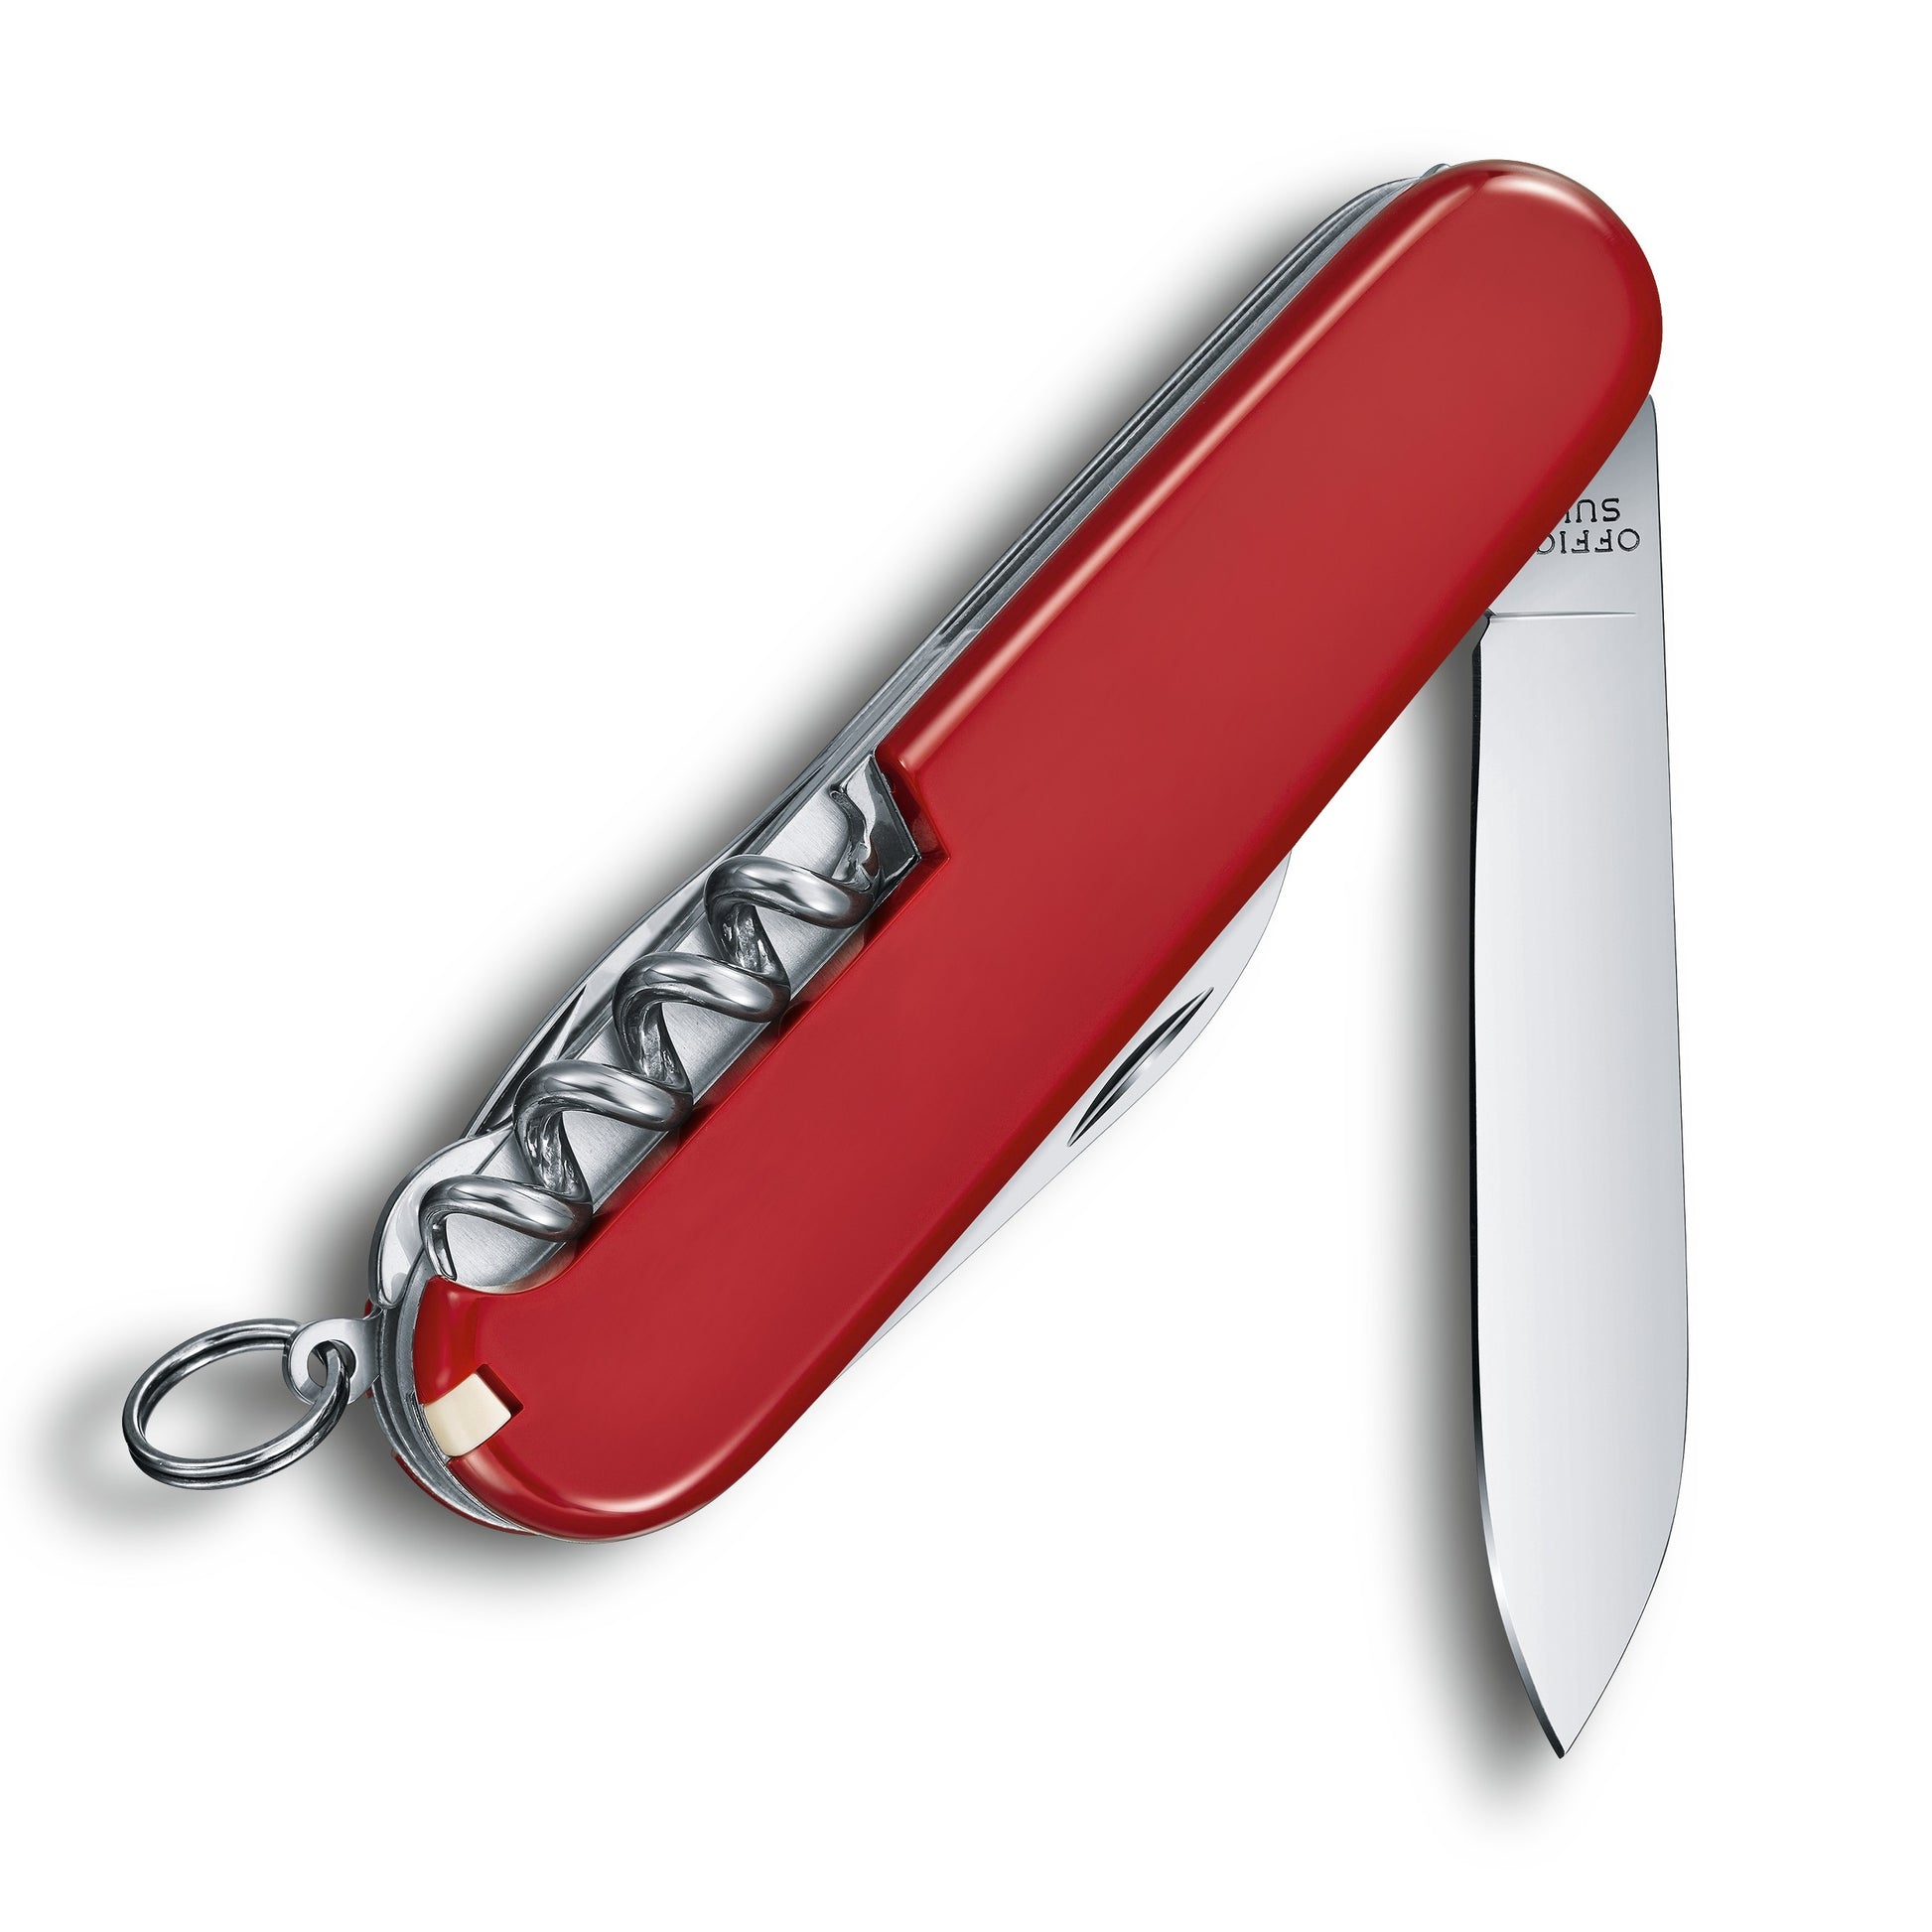 I was WRONG! The Victorinox Compact is BACK. 